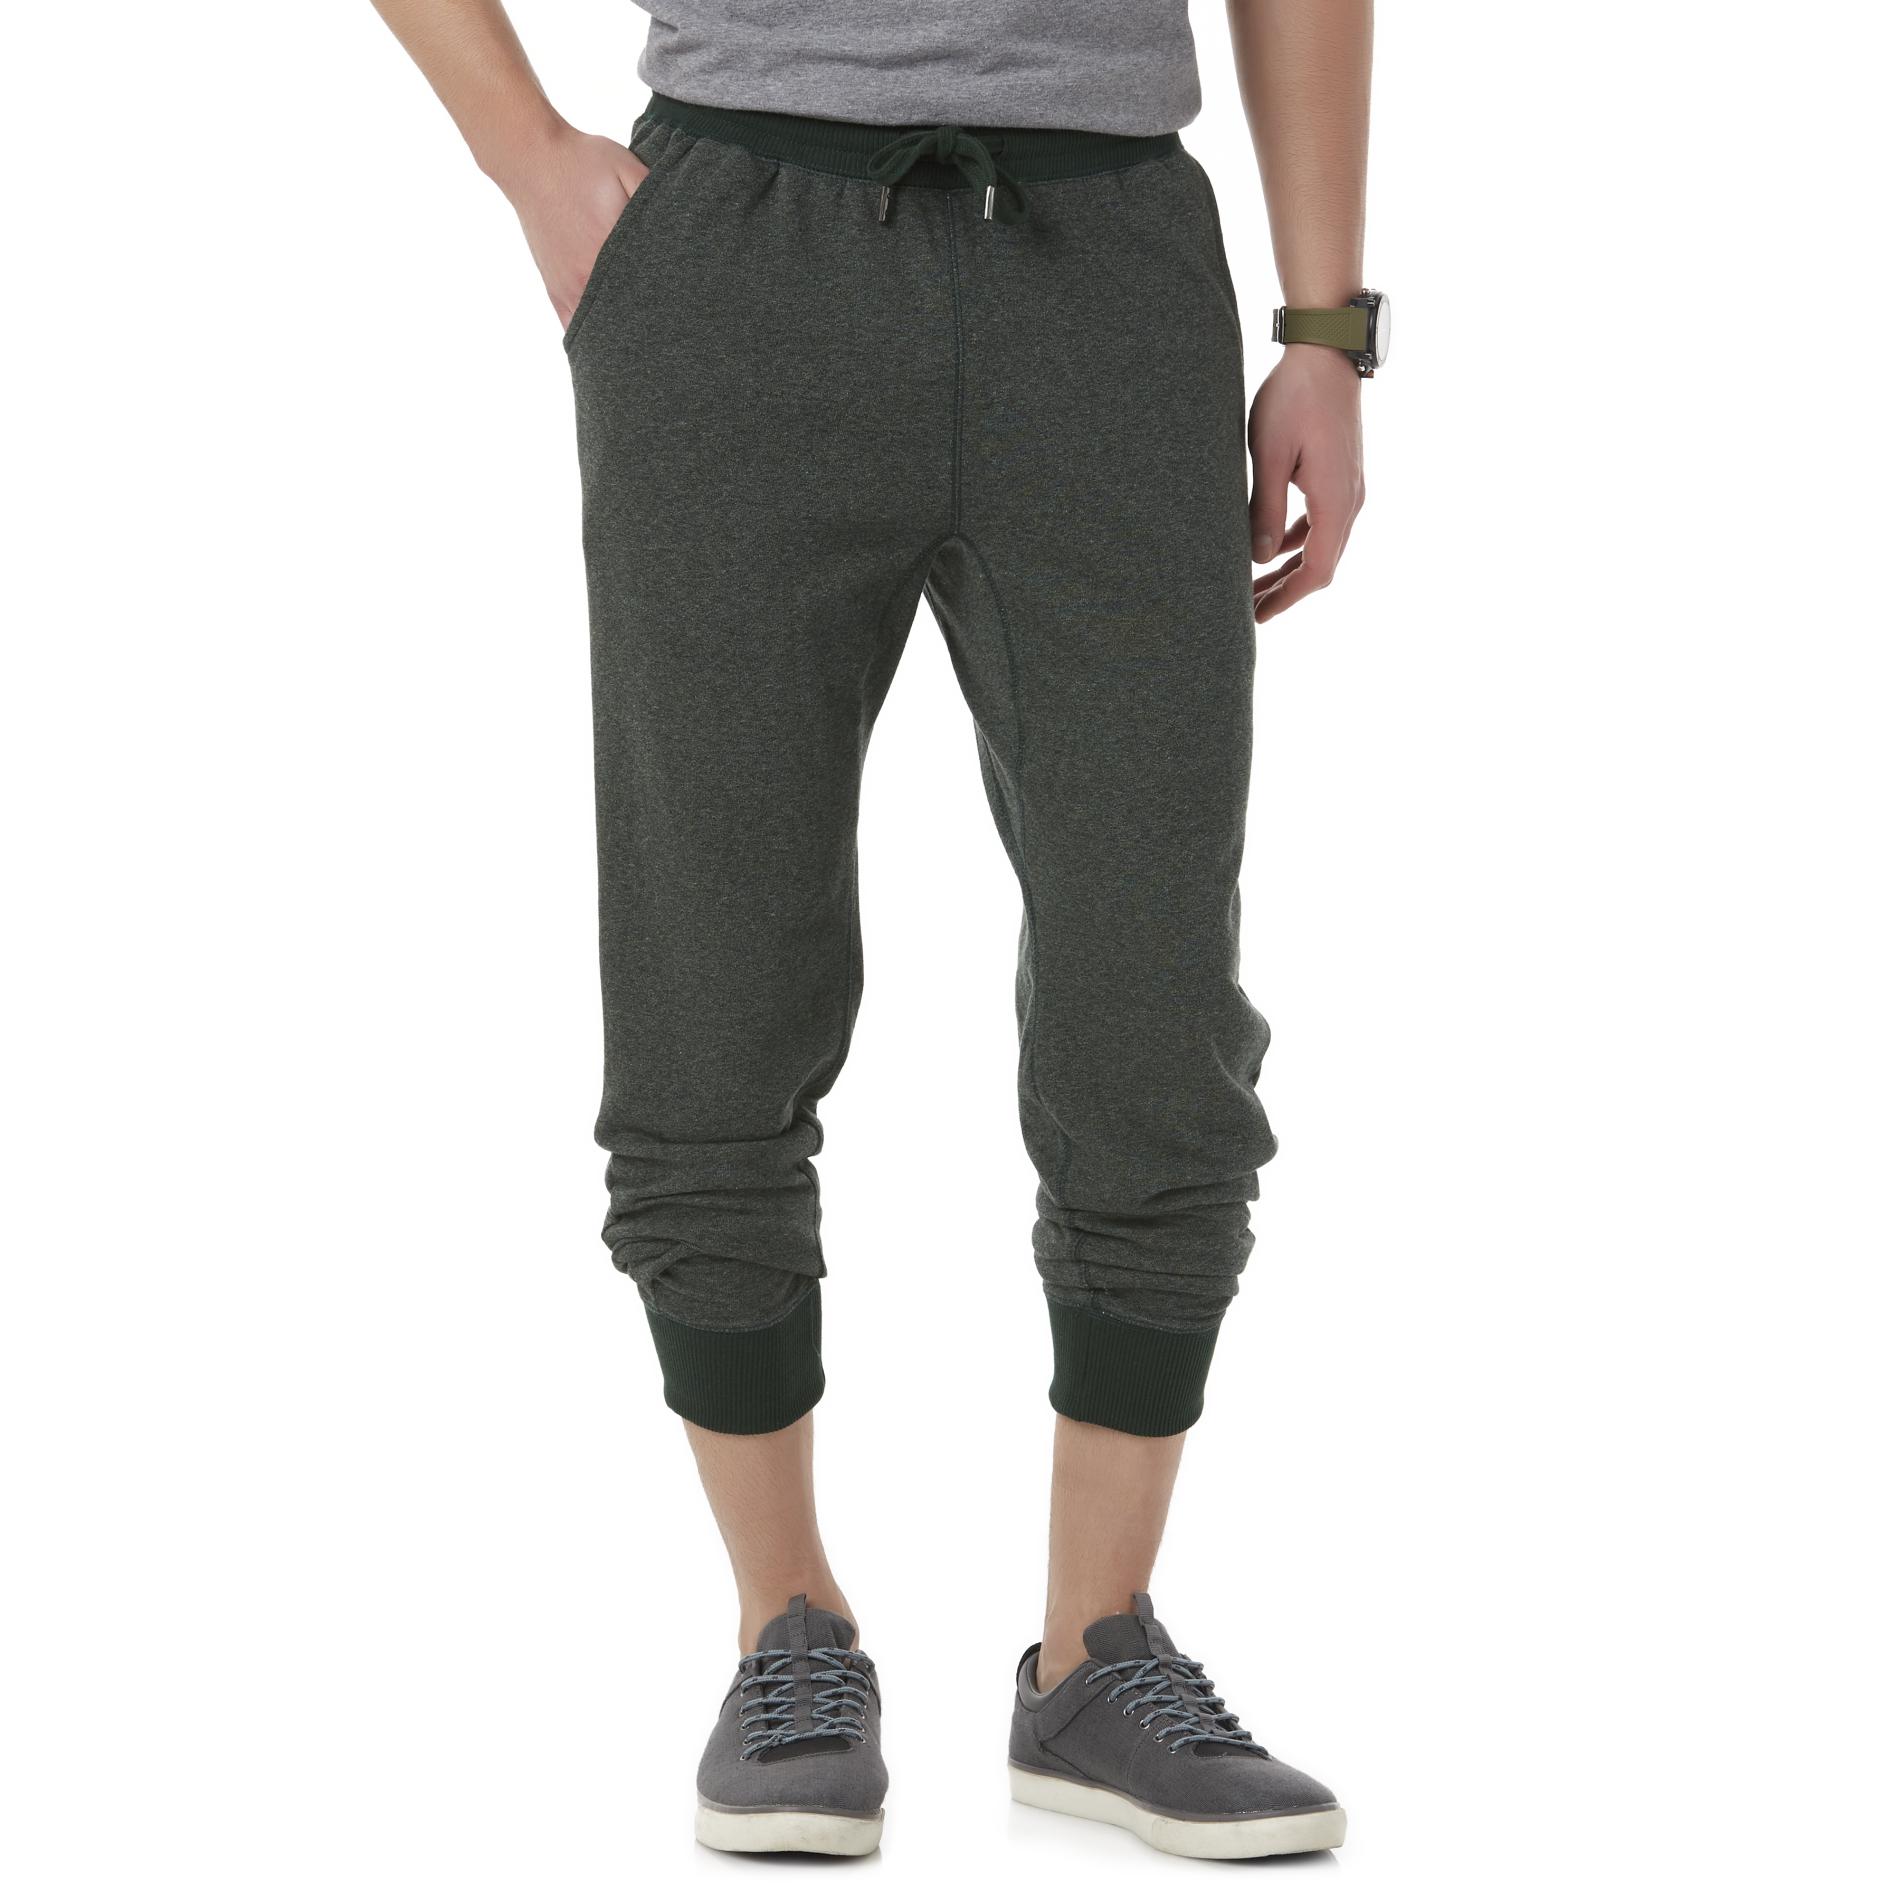 Simply Styled Men's Jogger Sweatpants